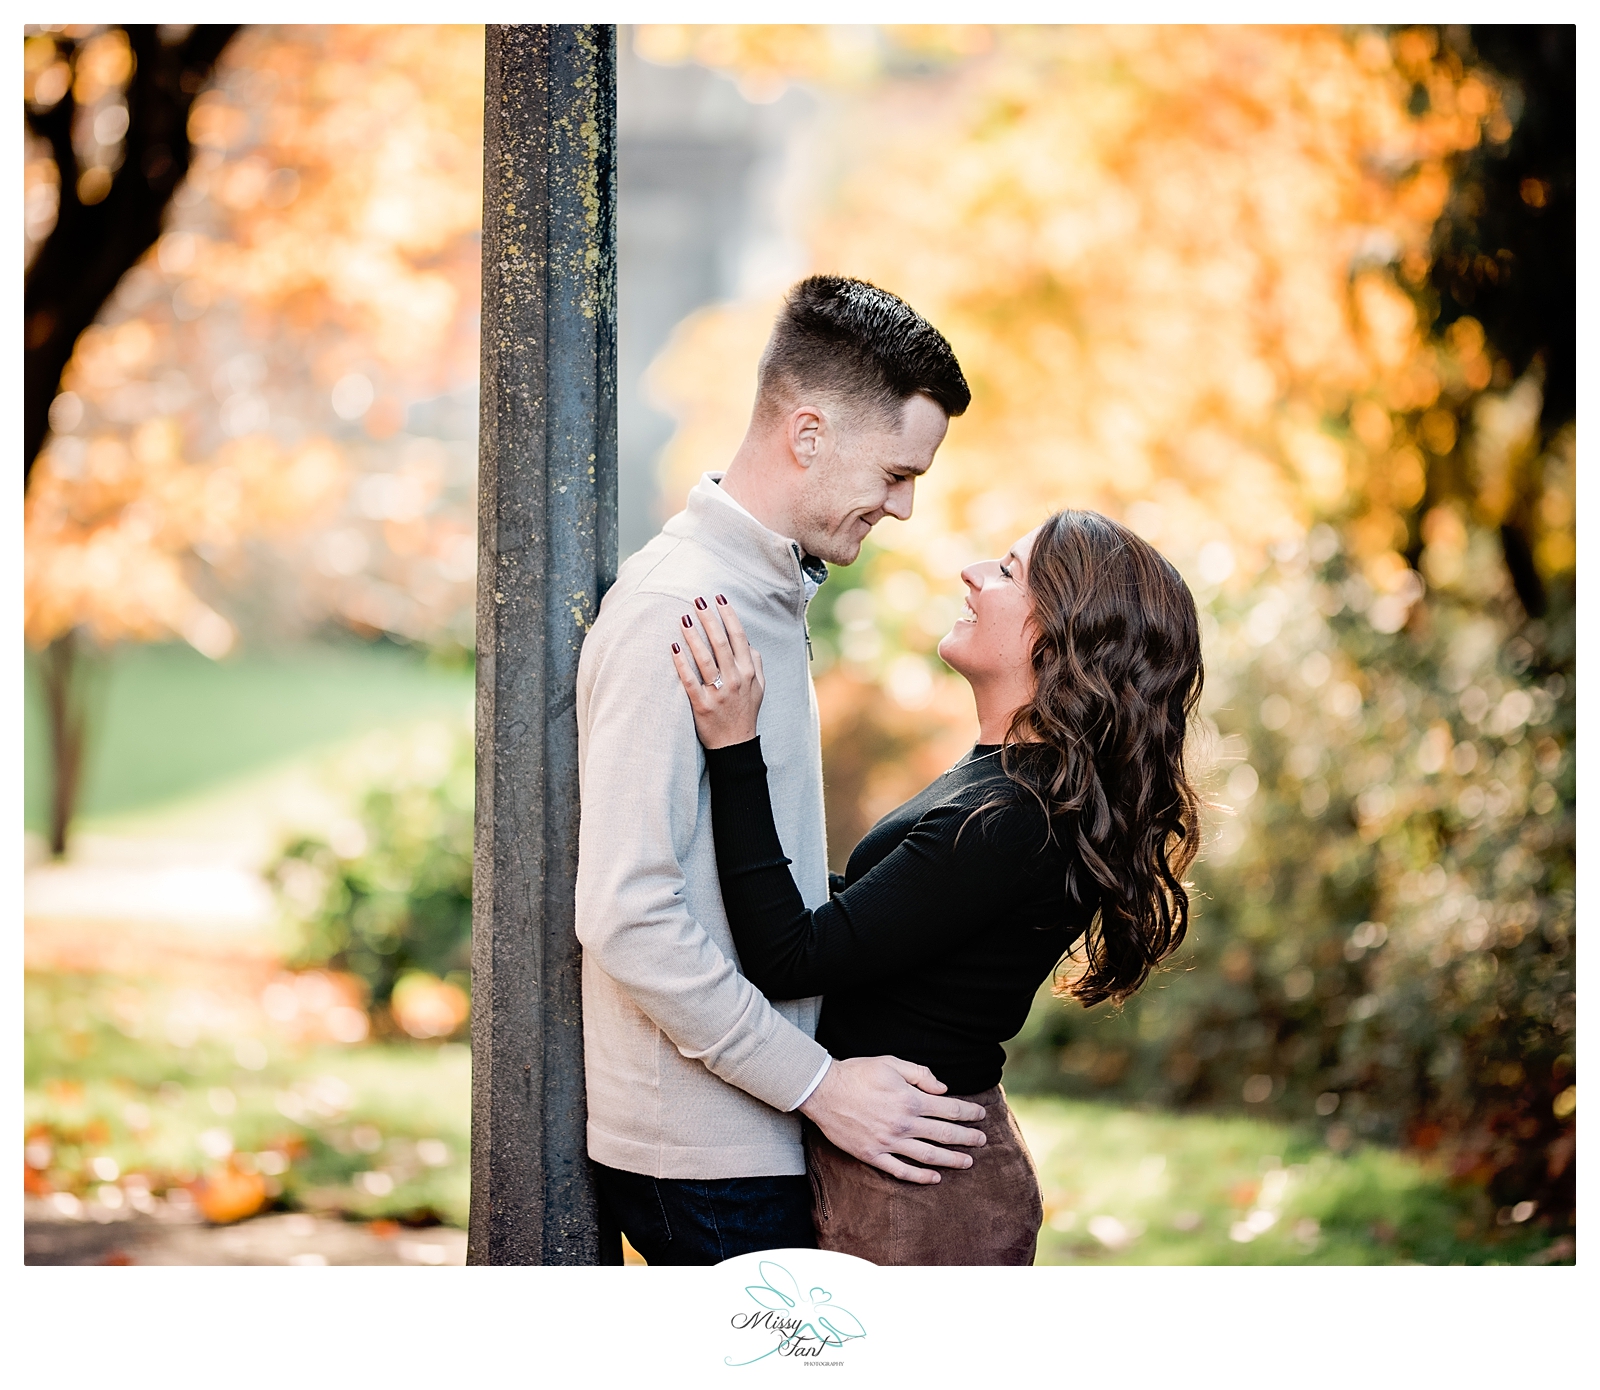 Megan and Taylor’s Engagement Session in Cathedral Park